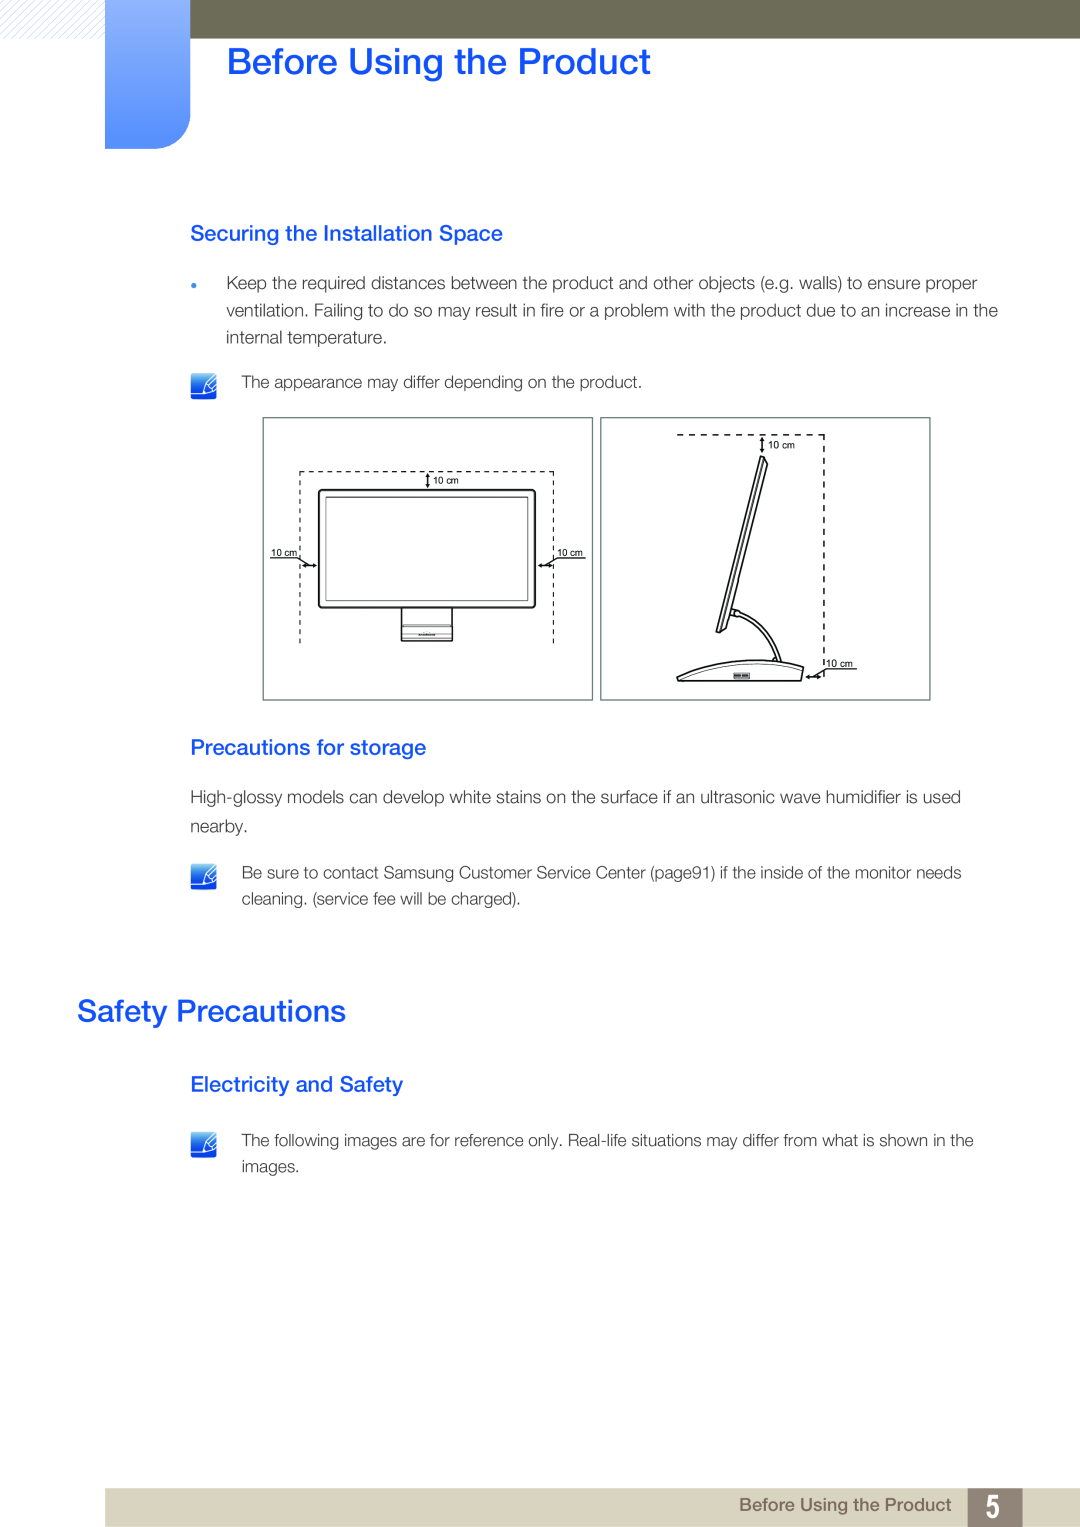 Samsung LC27A750XSSEN Safety Precautions, Securing the Installation Space, Precautions for storage, Electricity and Safety 